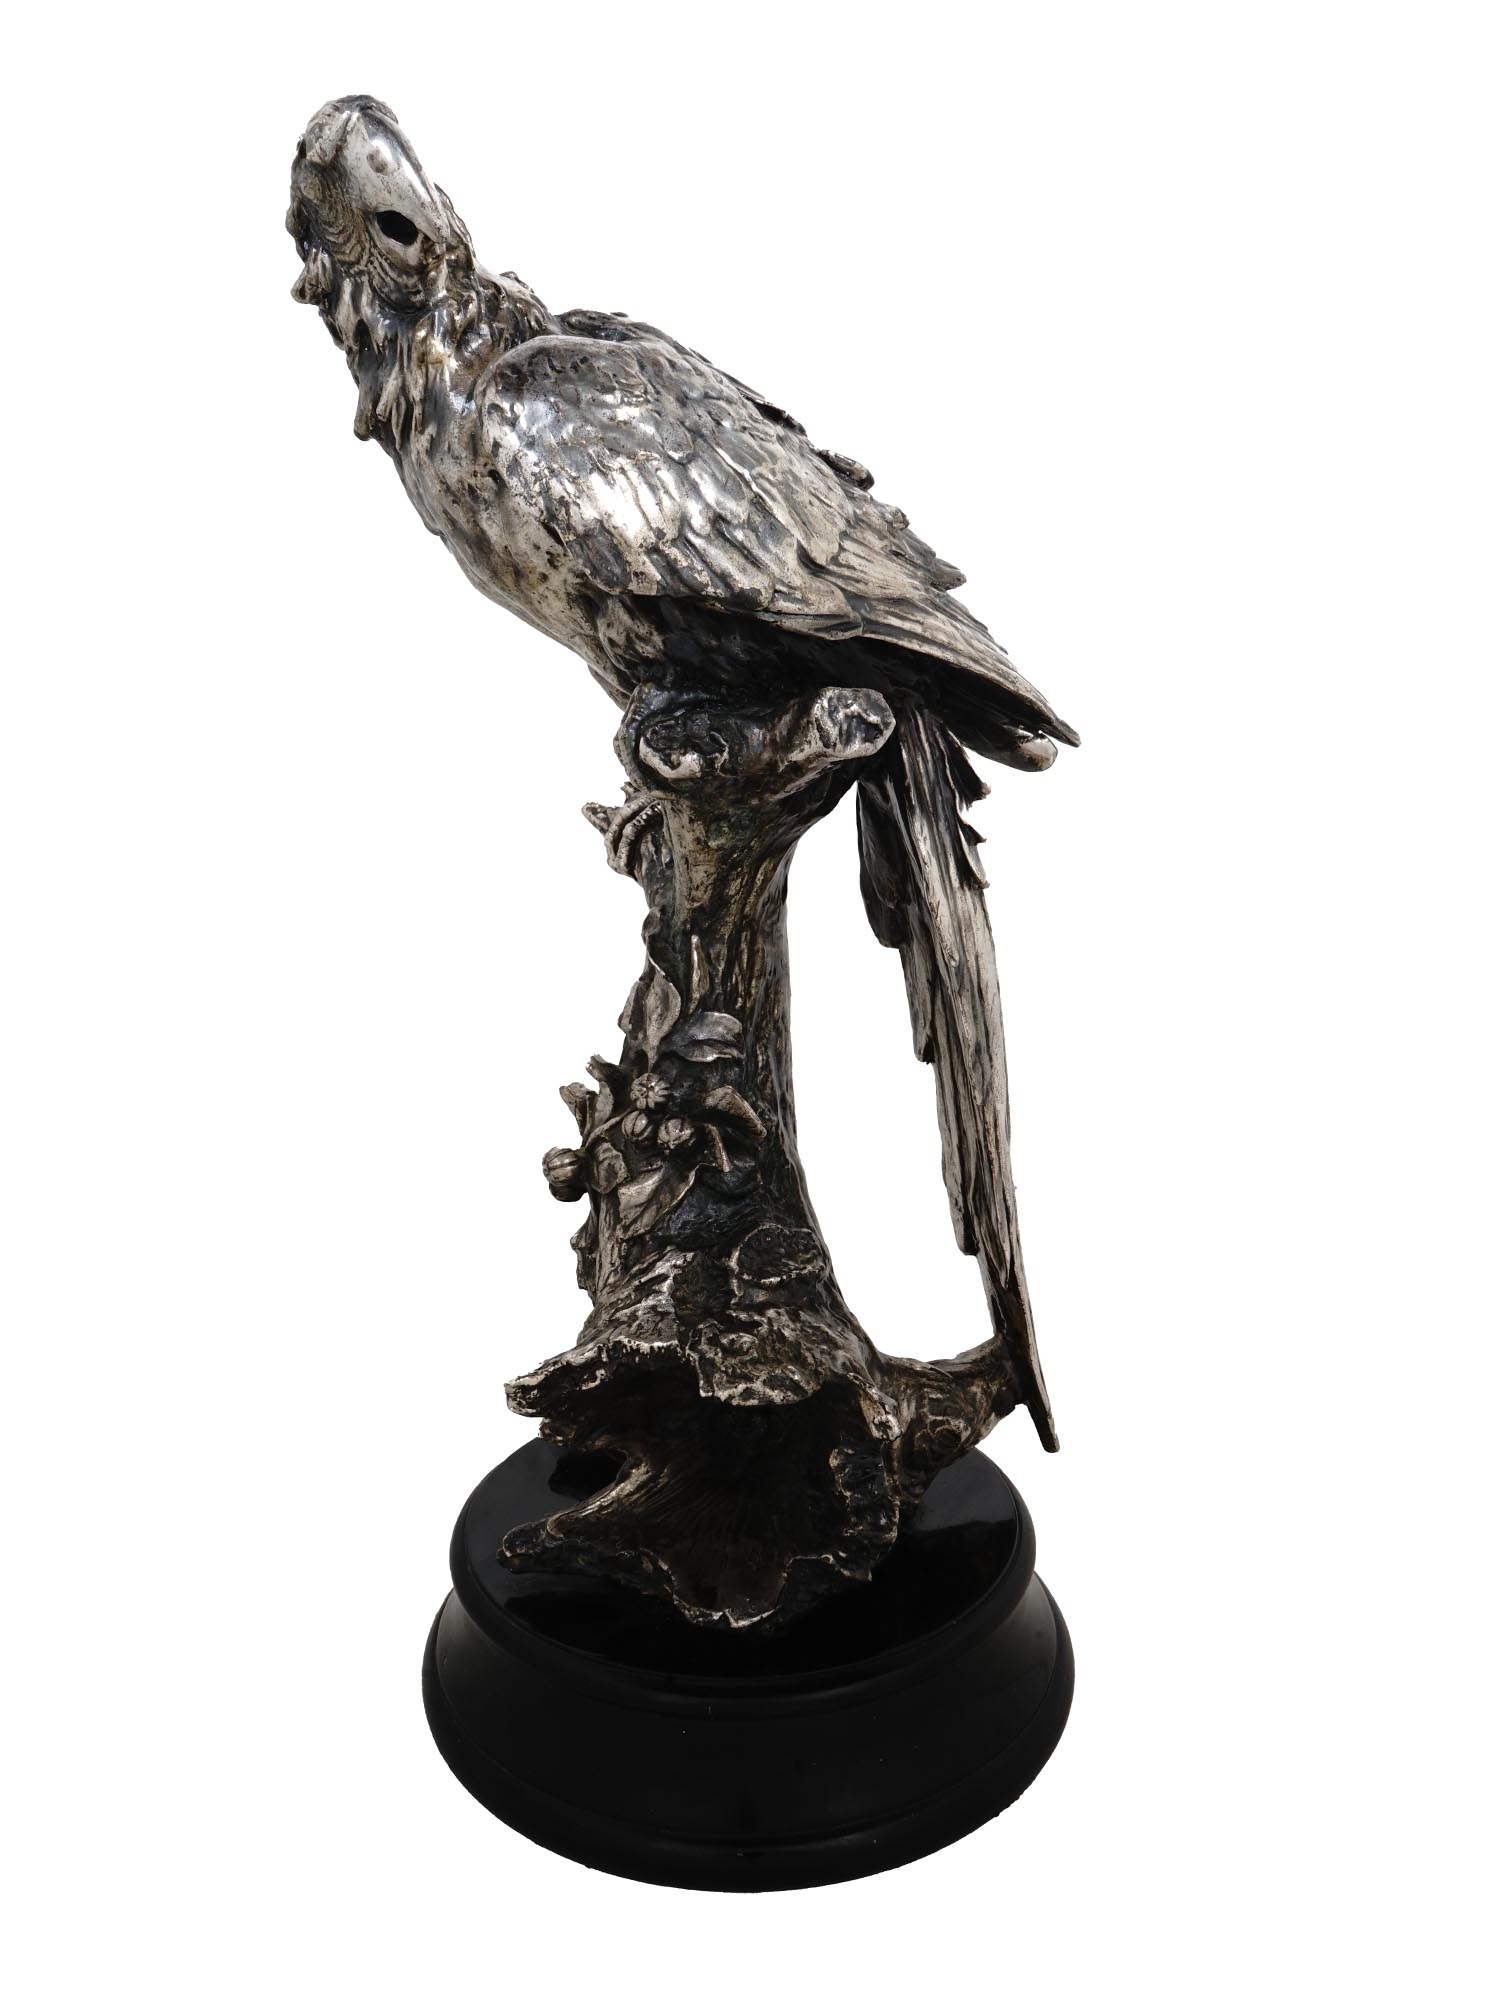 ANTIQUE SILVER PLATED CABINET FIGURE OF PARROT PIC-0